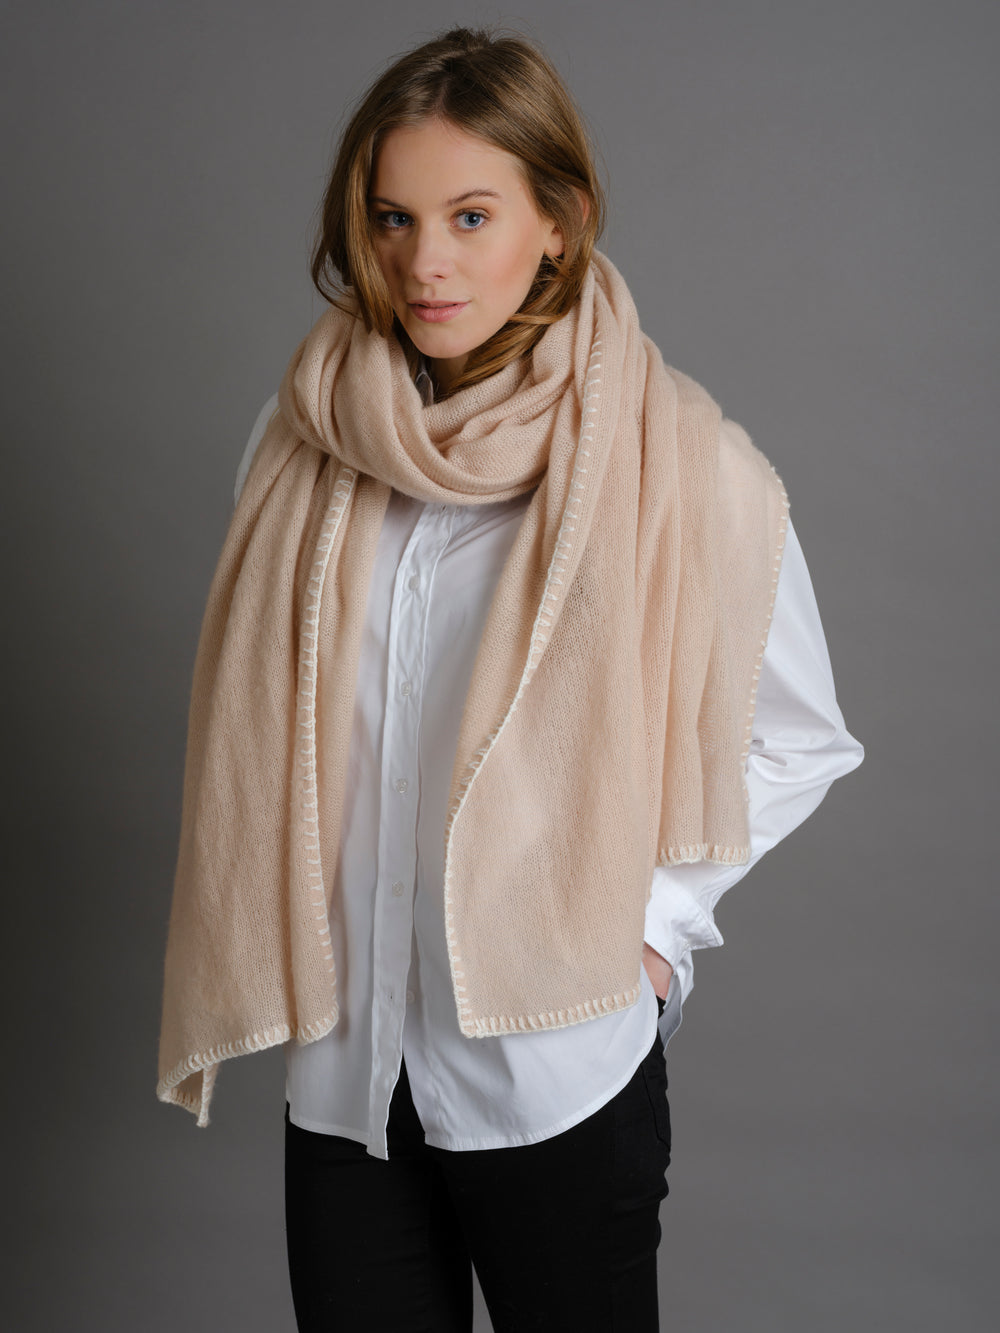 Cashmere scarf Horsestitch Oyster with contrast stitching in Snowflake